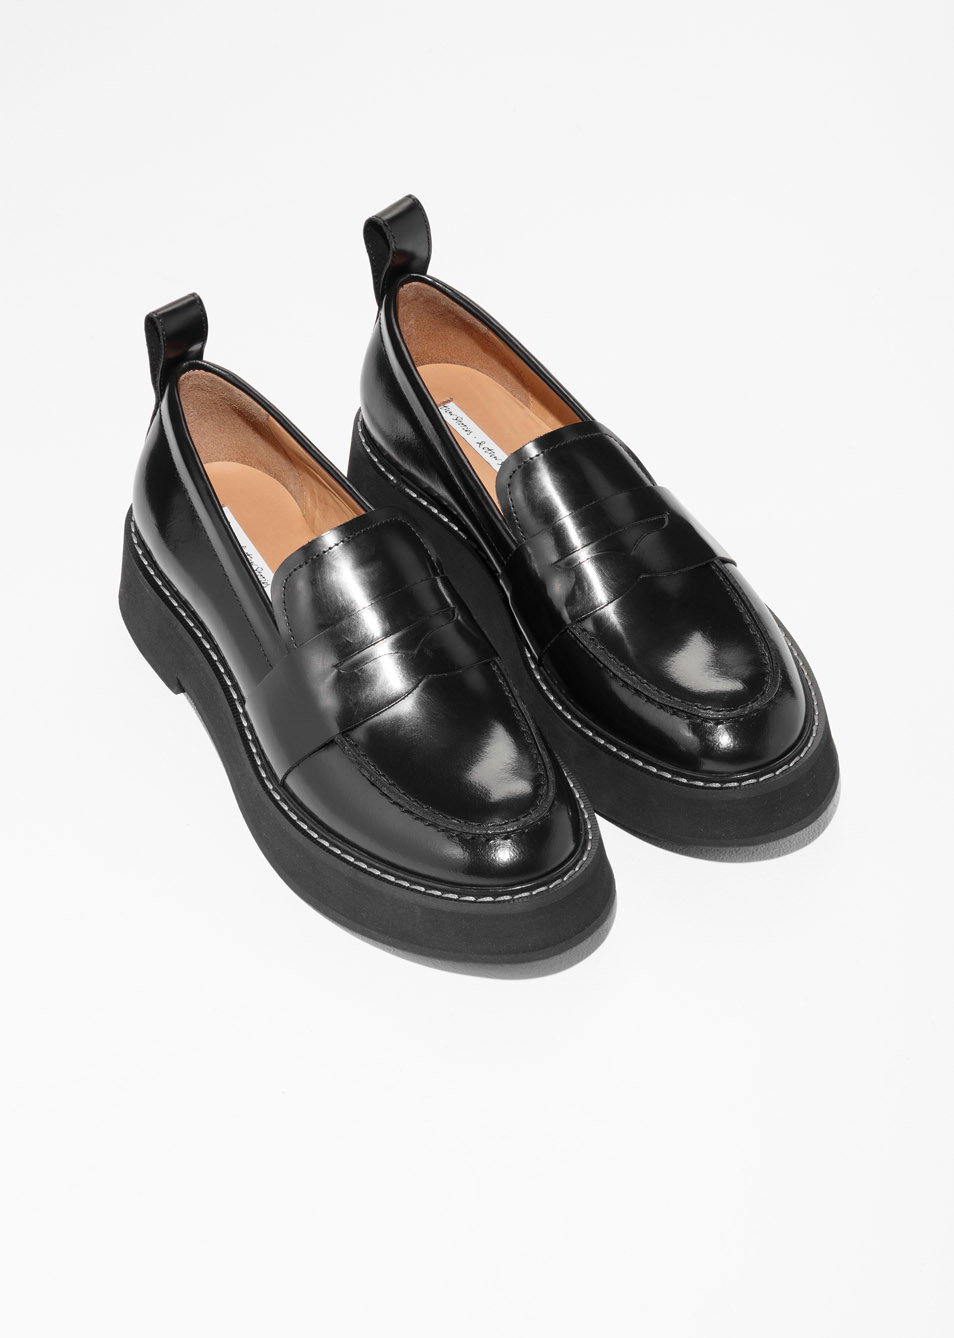 & Other Lust for loafers |